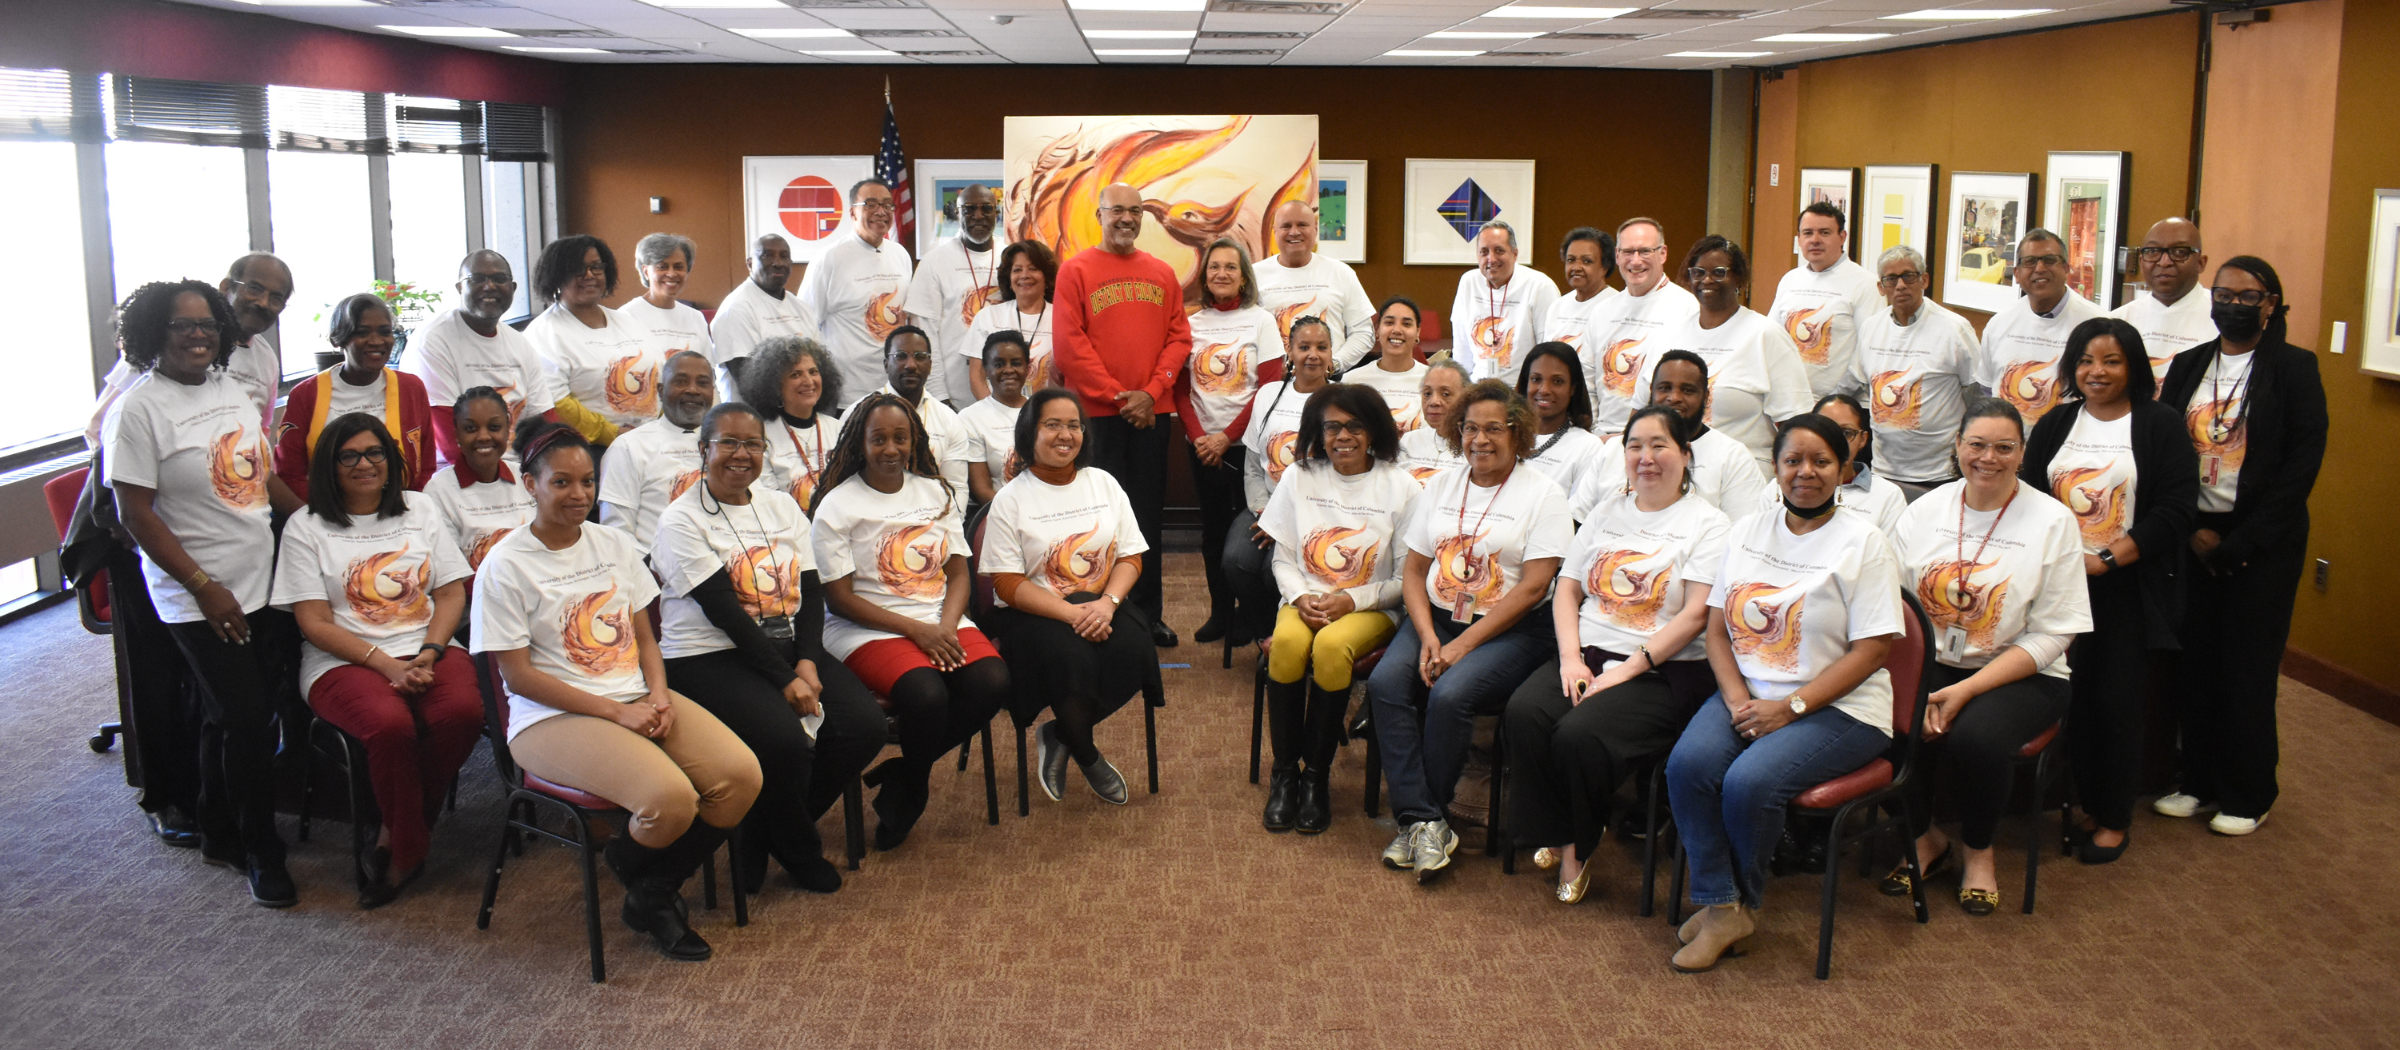 Learn more about the UDC Foundation Servant Leadership Campaign